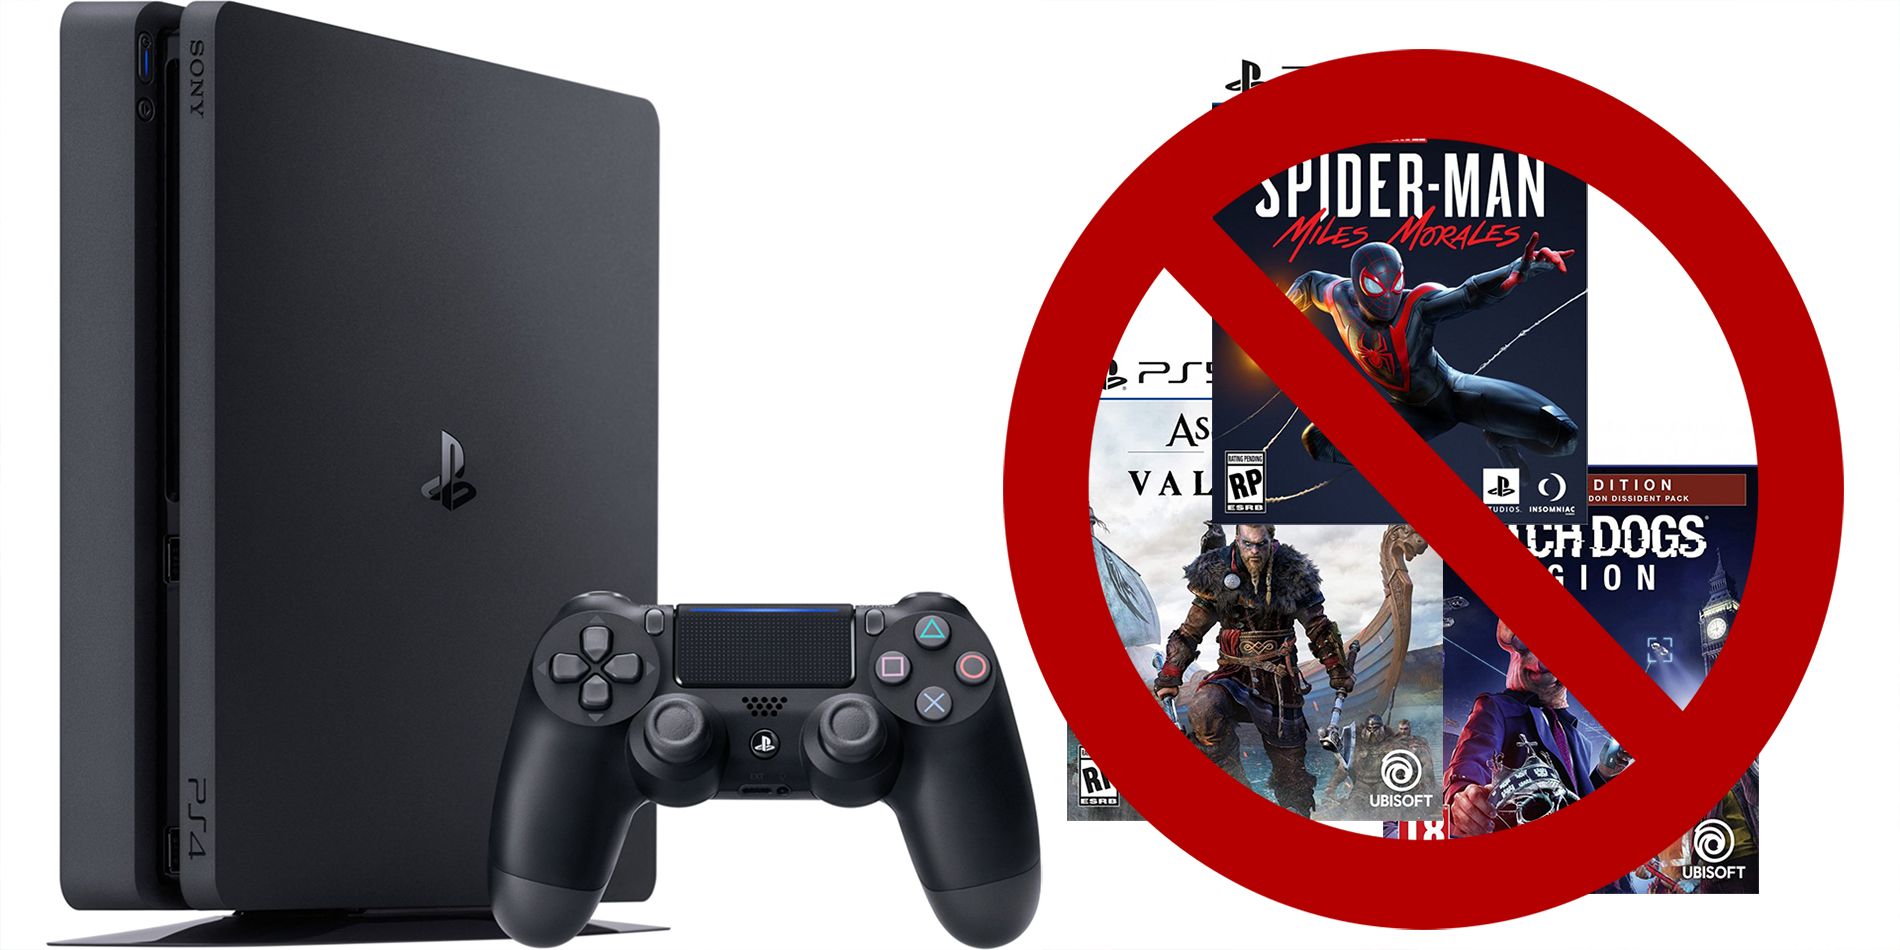 PS4 Players Not To Insert PS5 Game Discs Their Consoles